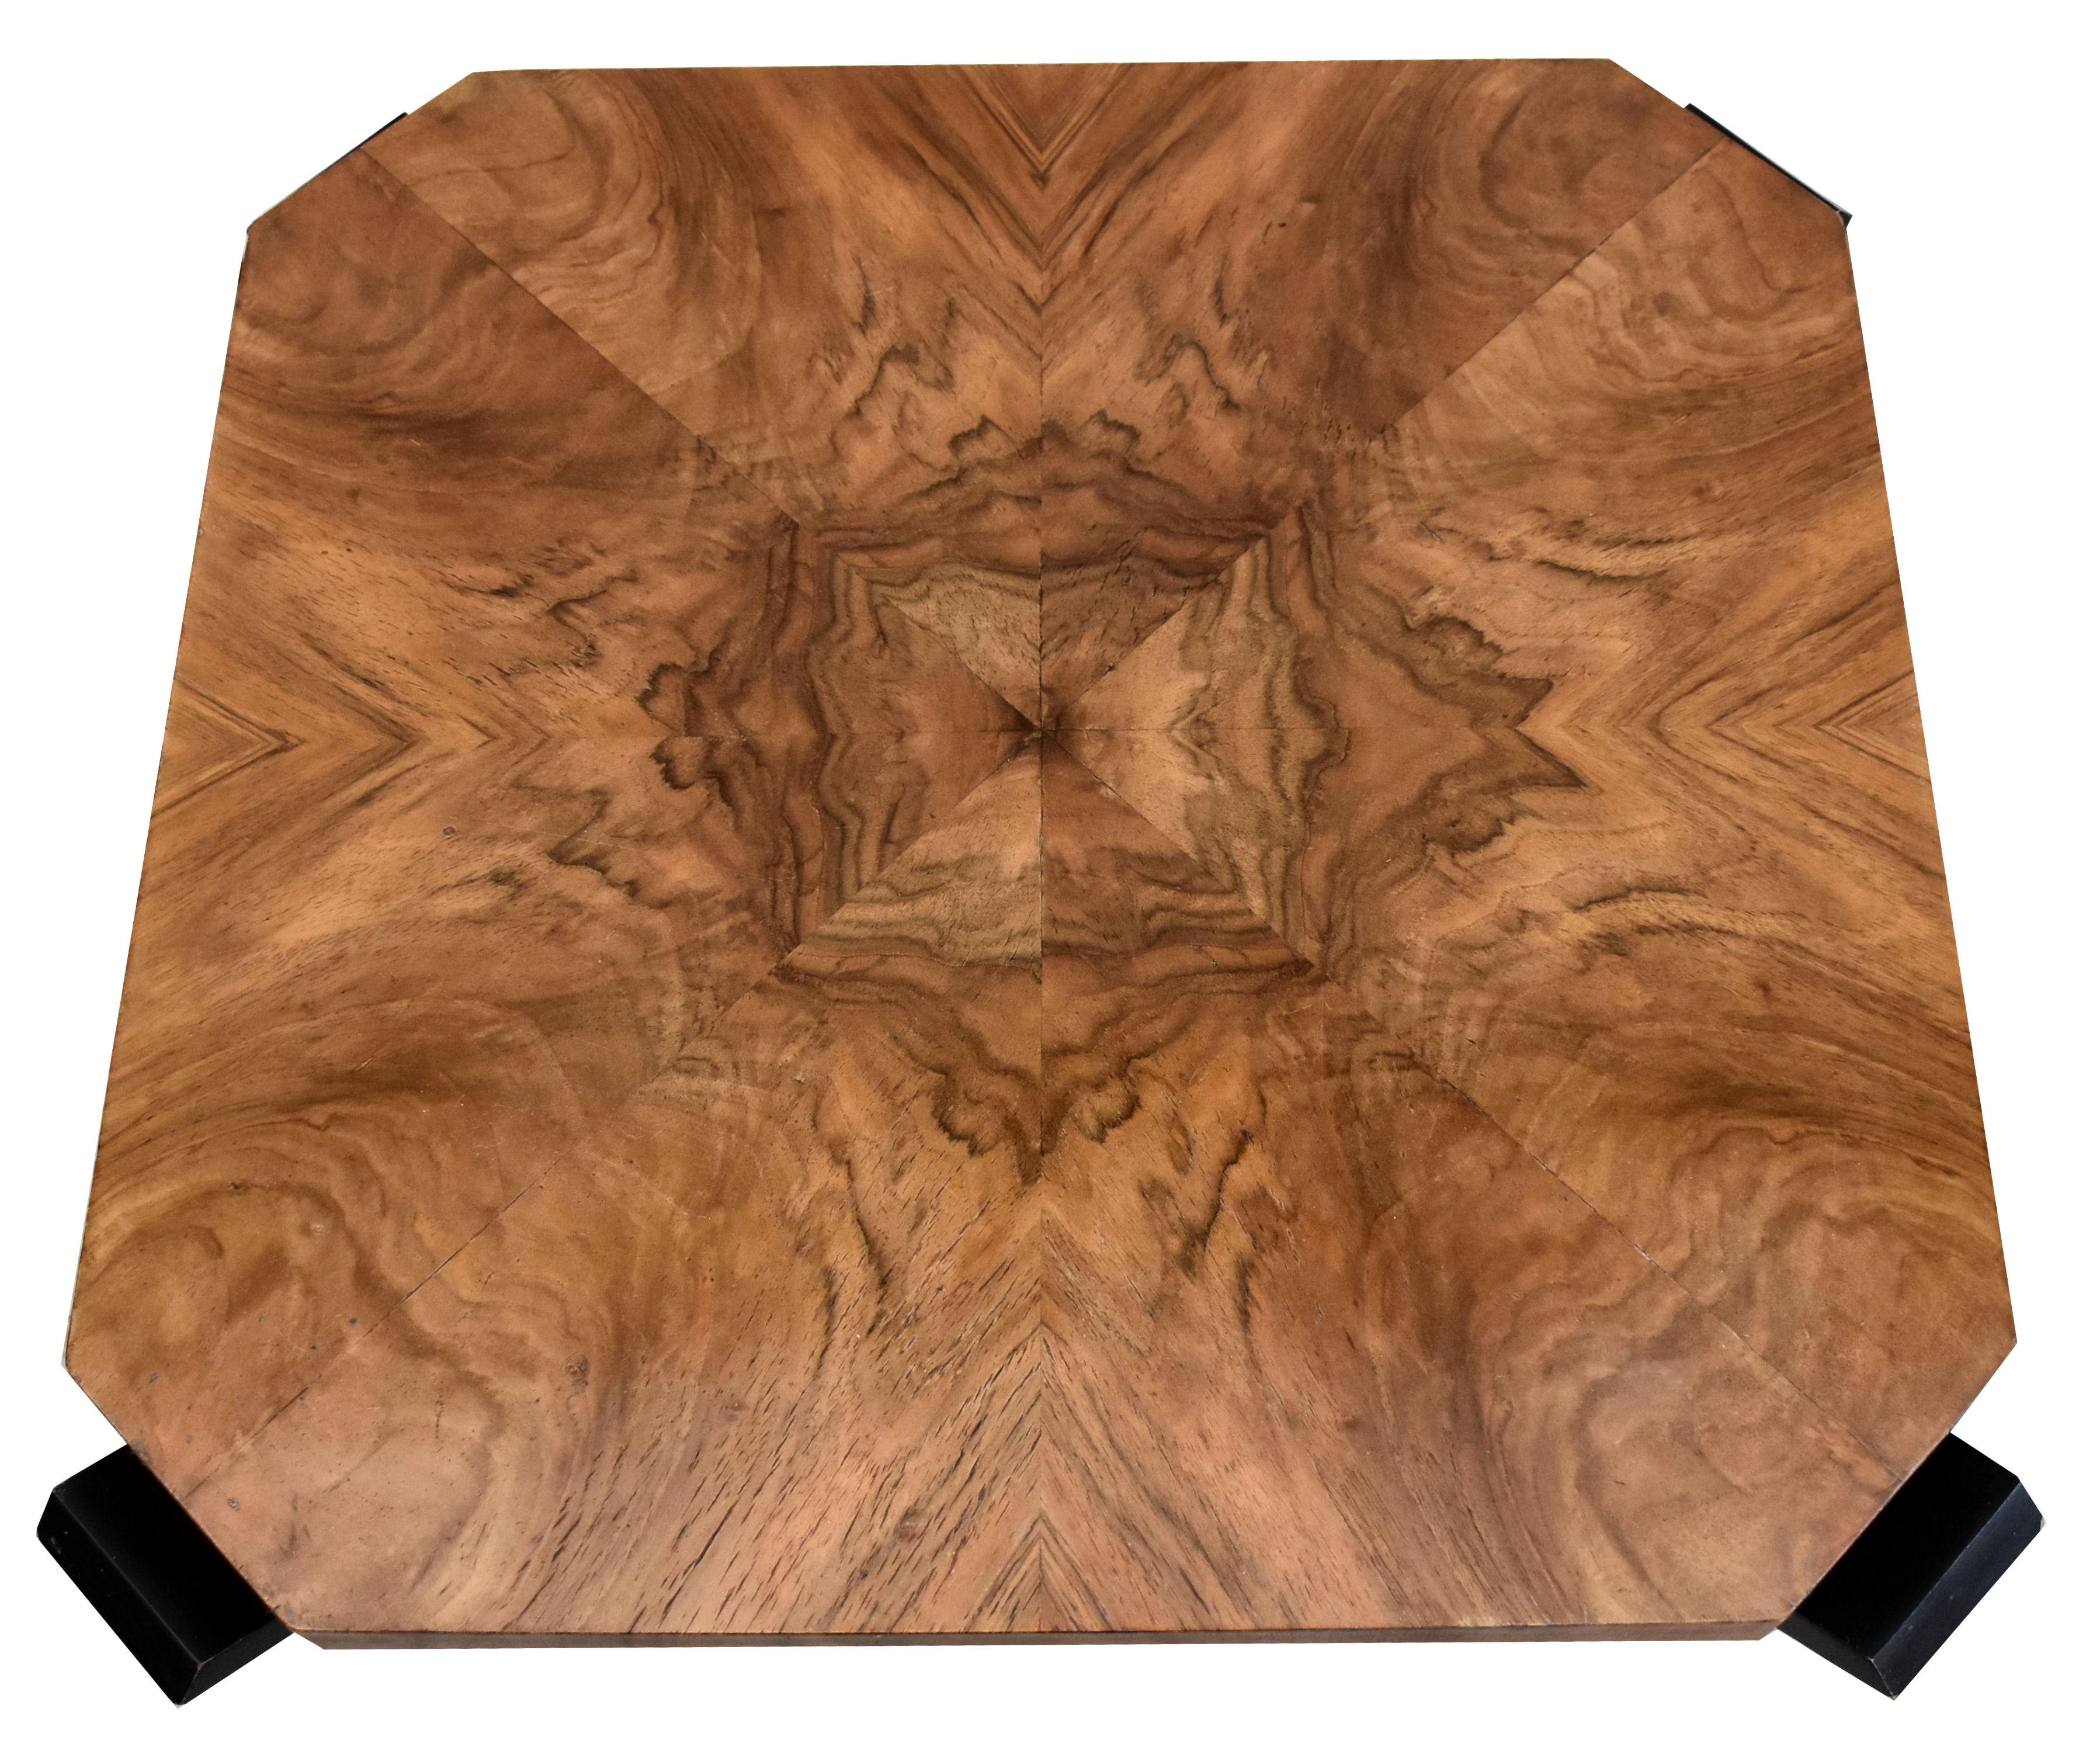 Very stylish Art Deco walnut table with ebonised legs creating a wonderful tulip shape and dating to the 1930's. This table is beautifully shaped and fully restored to showroom condition. Wonderfully figured walnut veneers to the top and base with